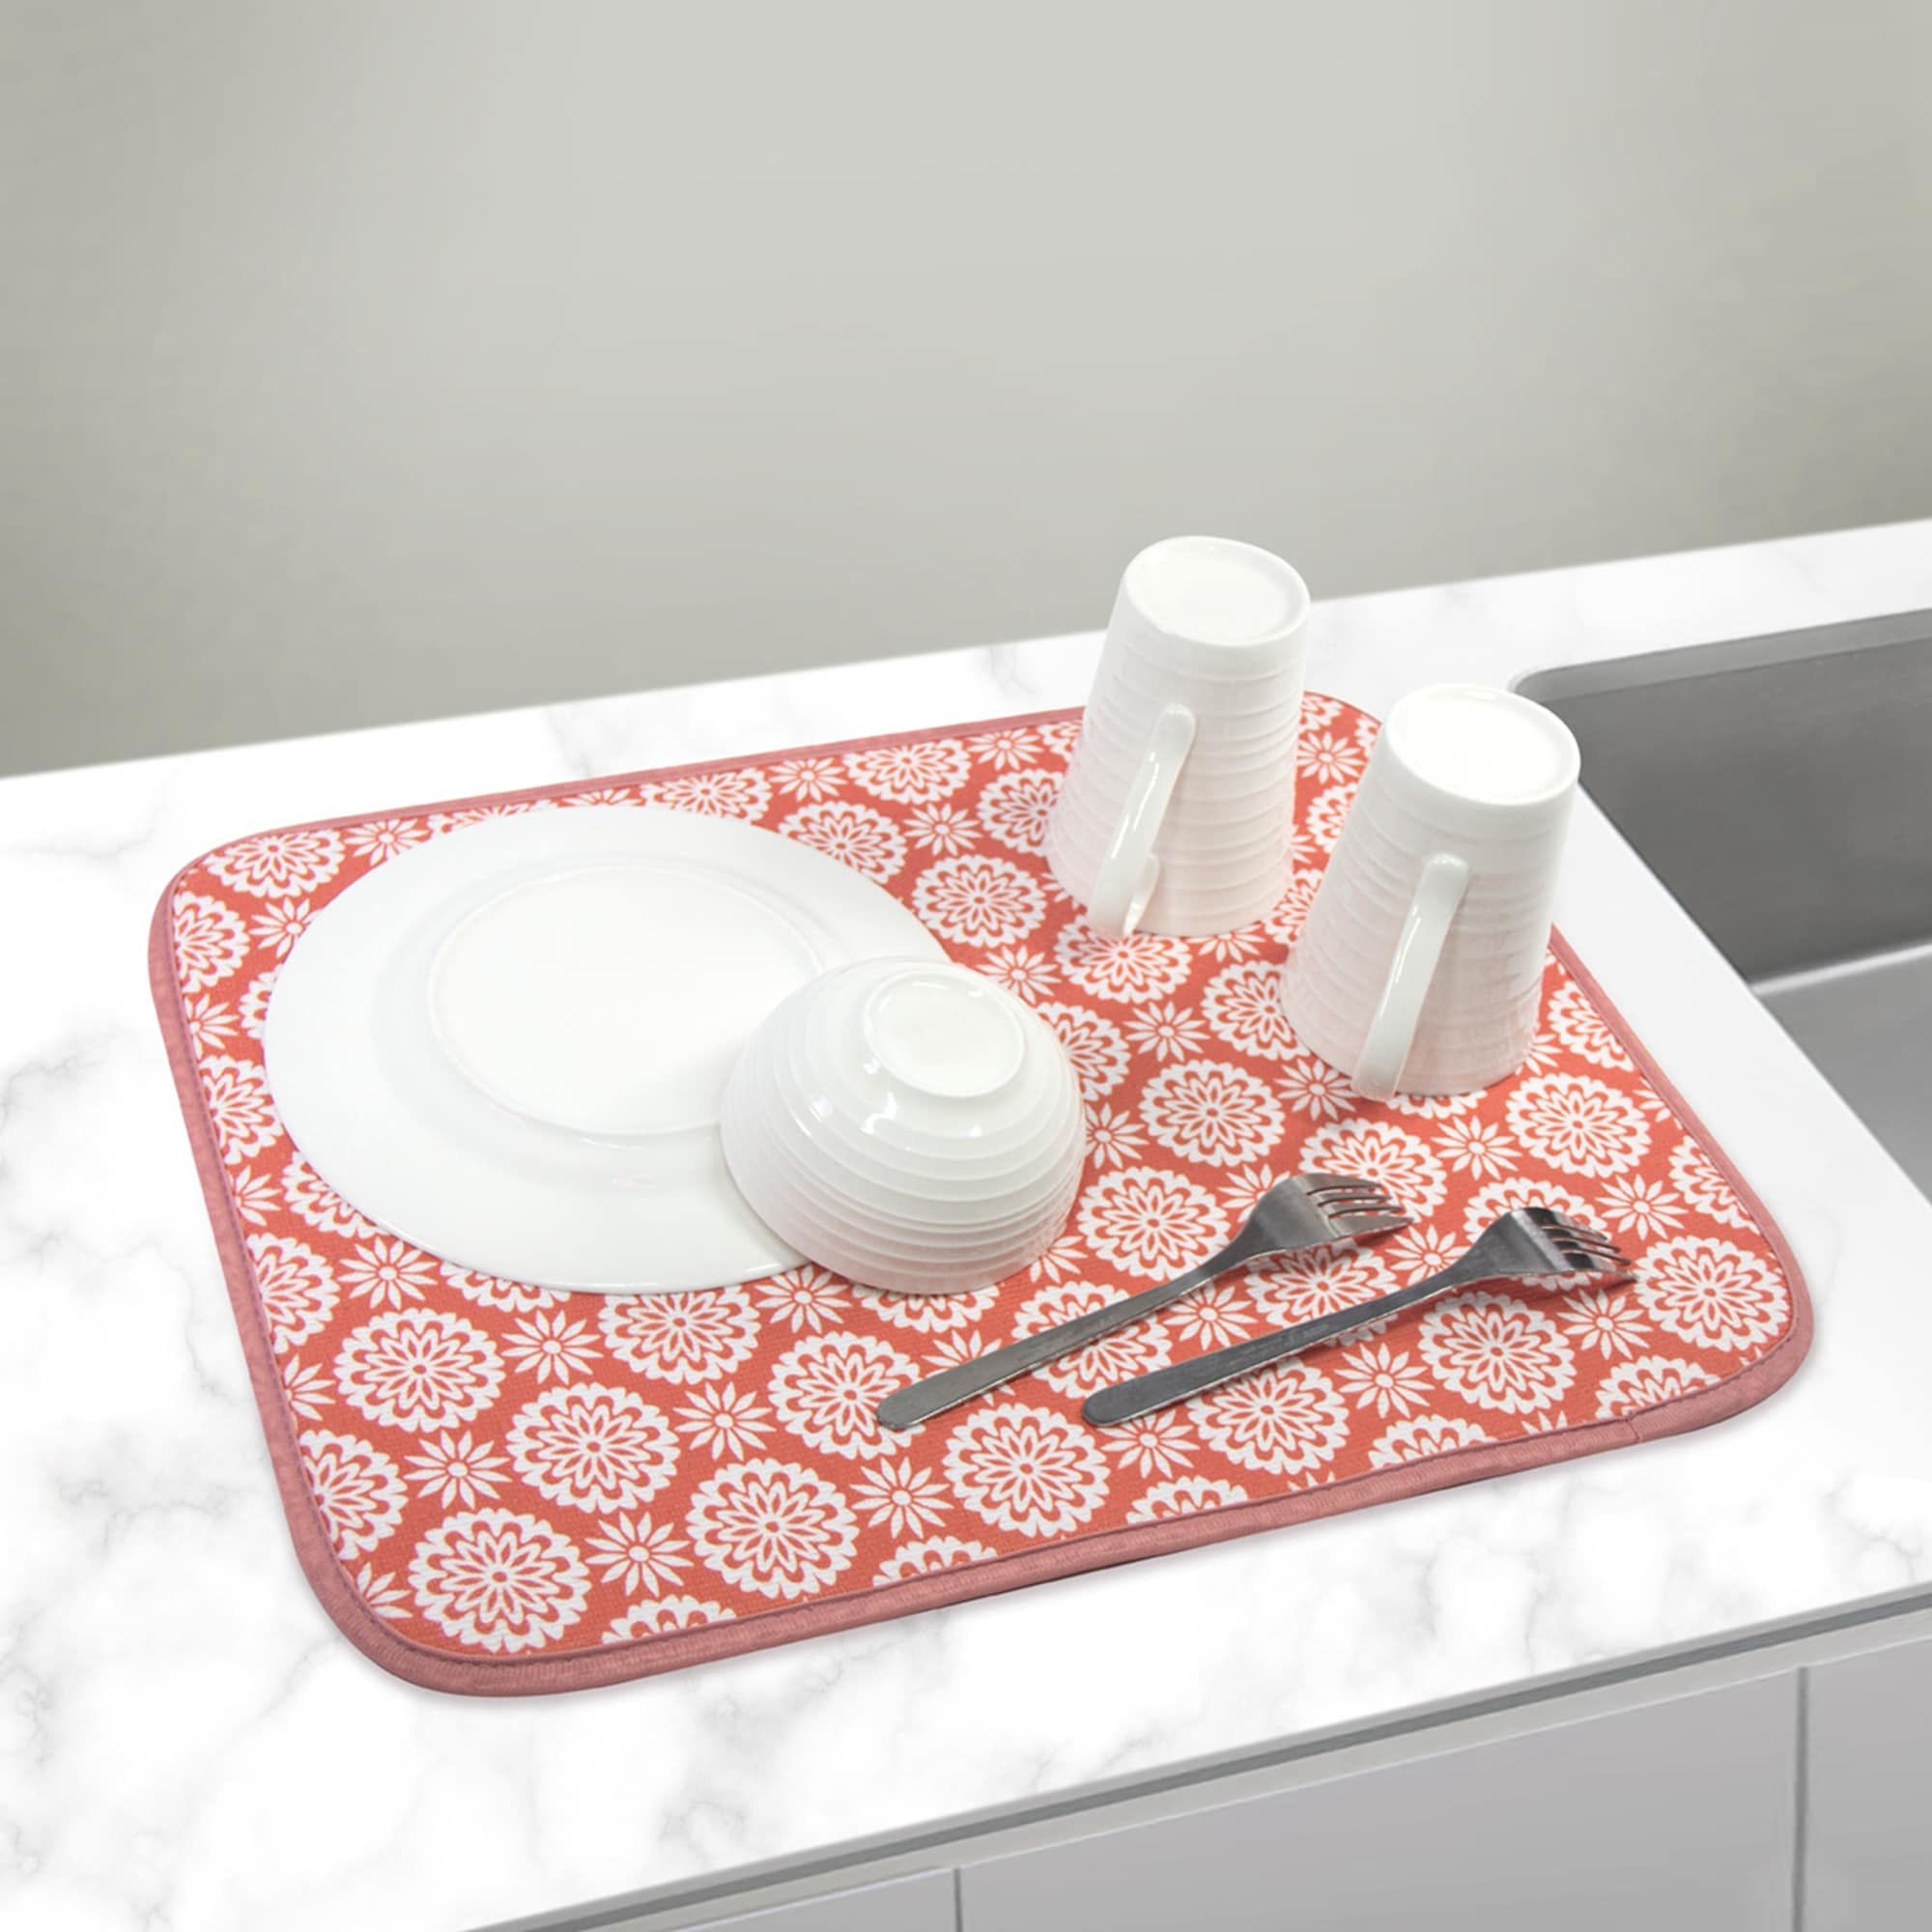 https://ak1.ostkcdn.com/images/products/is/images/direct/ff9e8fb4a1d0c4eacd19955f32e0805fadfa4ae4/Reversible-Dish-Drying-Mat-2-Pk%2C-Coral.jpg